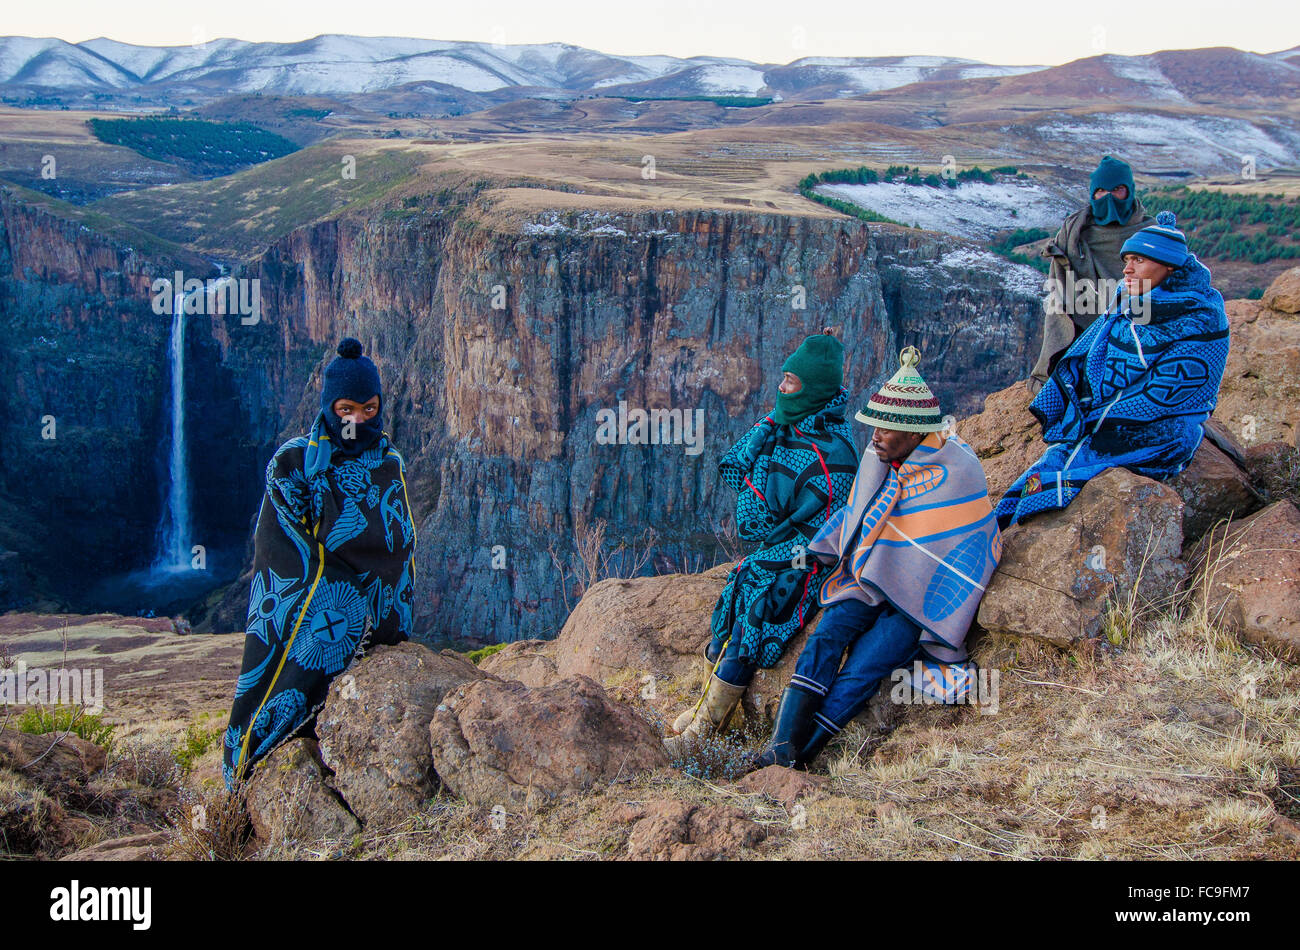 Local sheep shepherds converge on the cliffs of Maletsunyane Falls in rural Lesotho. Stock Photo